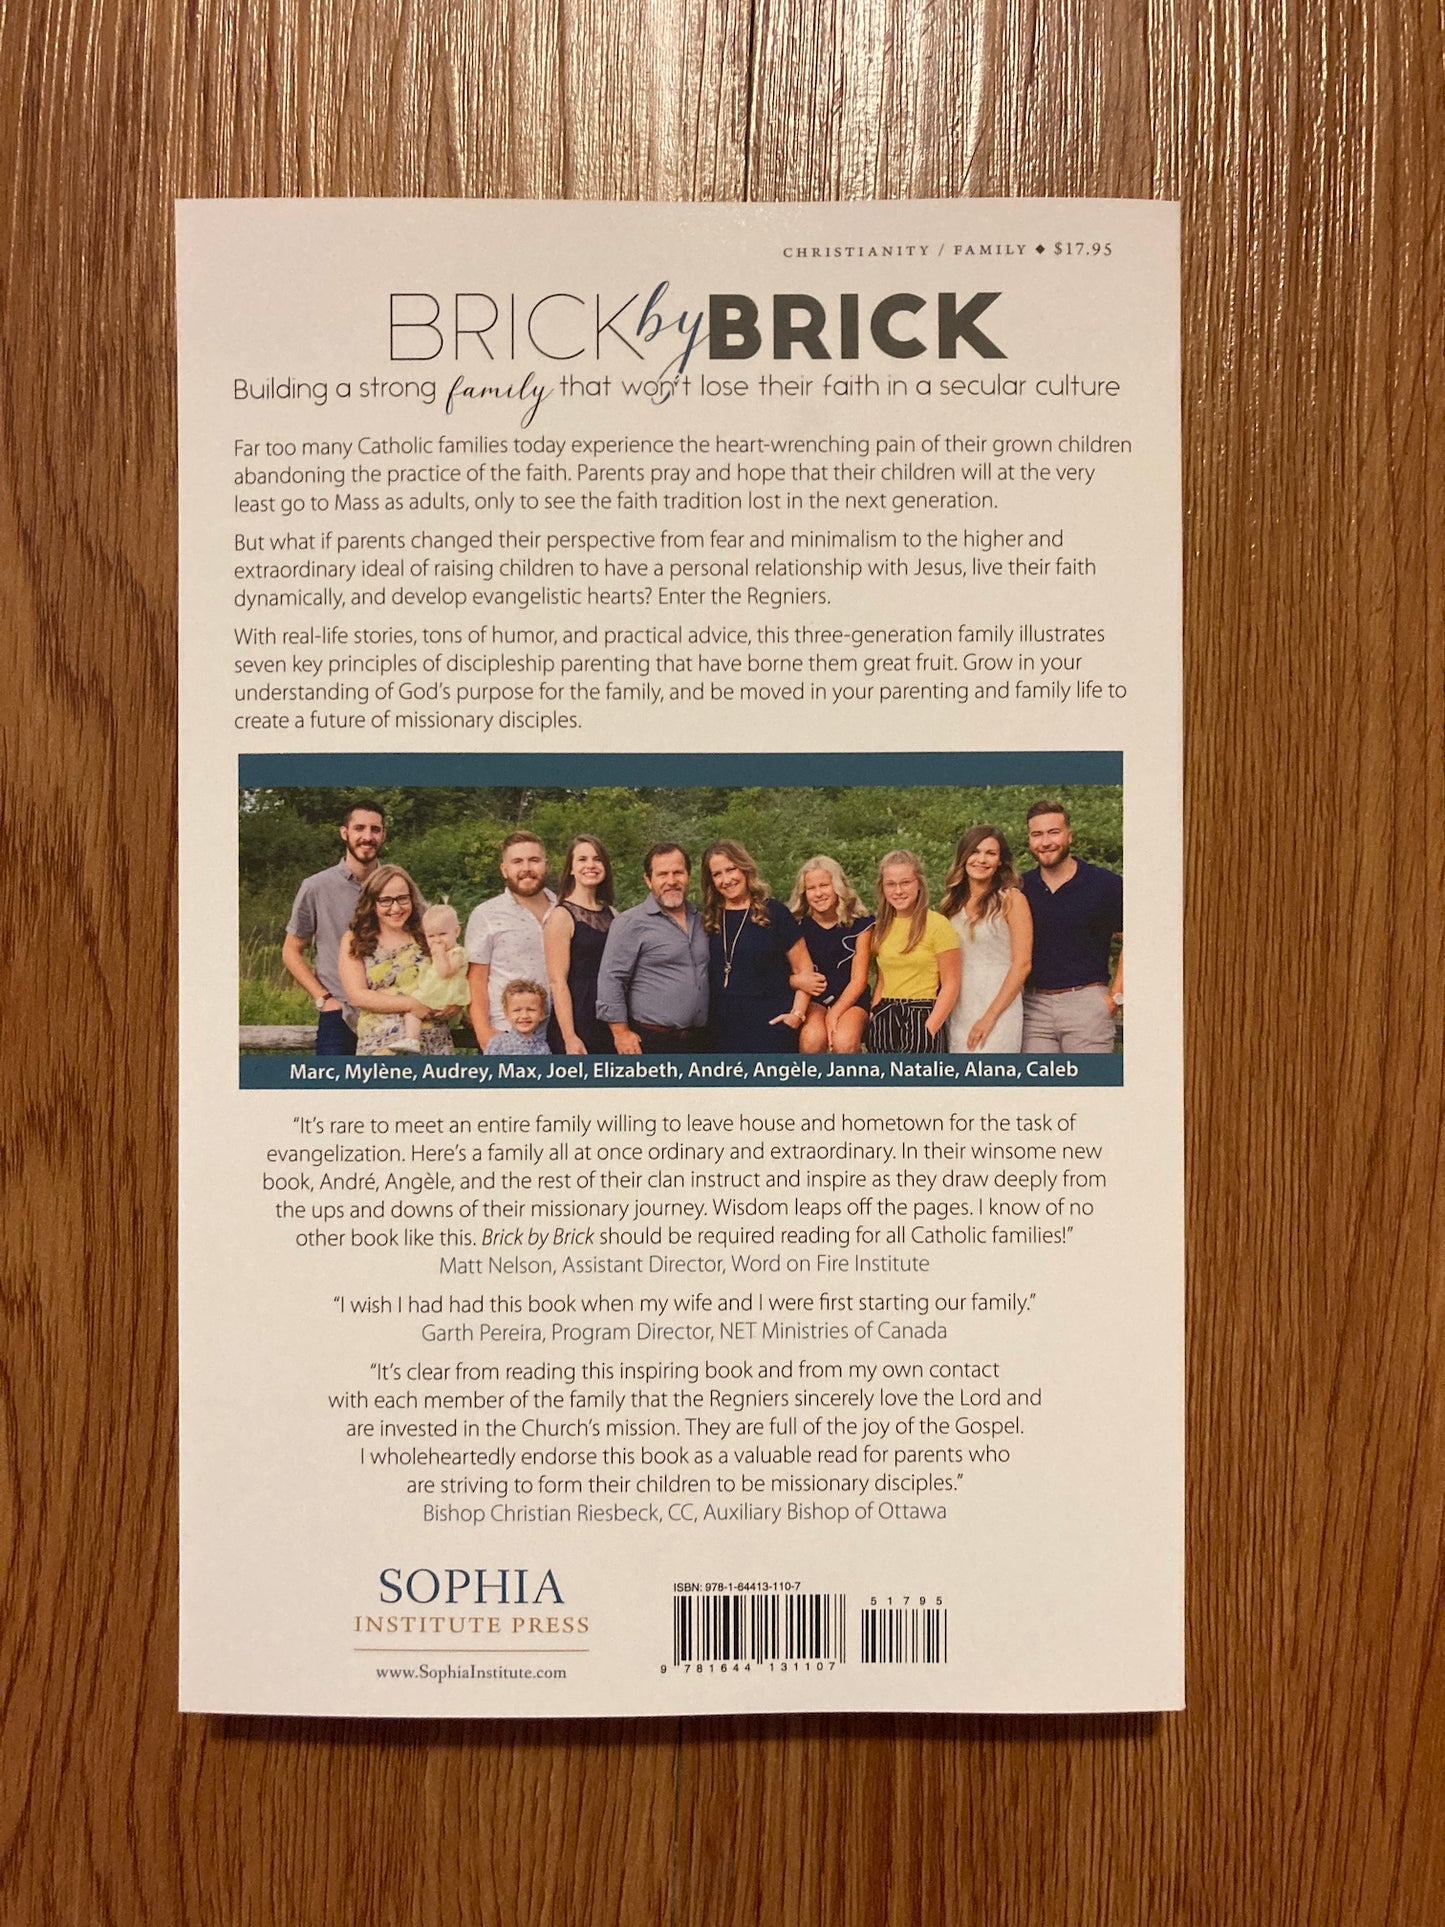 Brick by Brick, by The Regnier Family